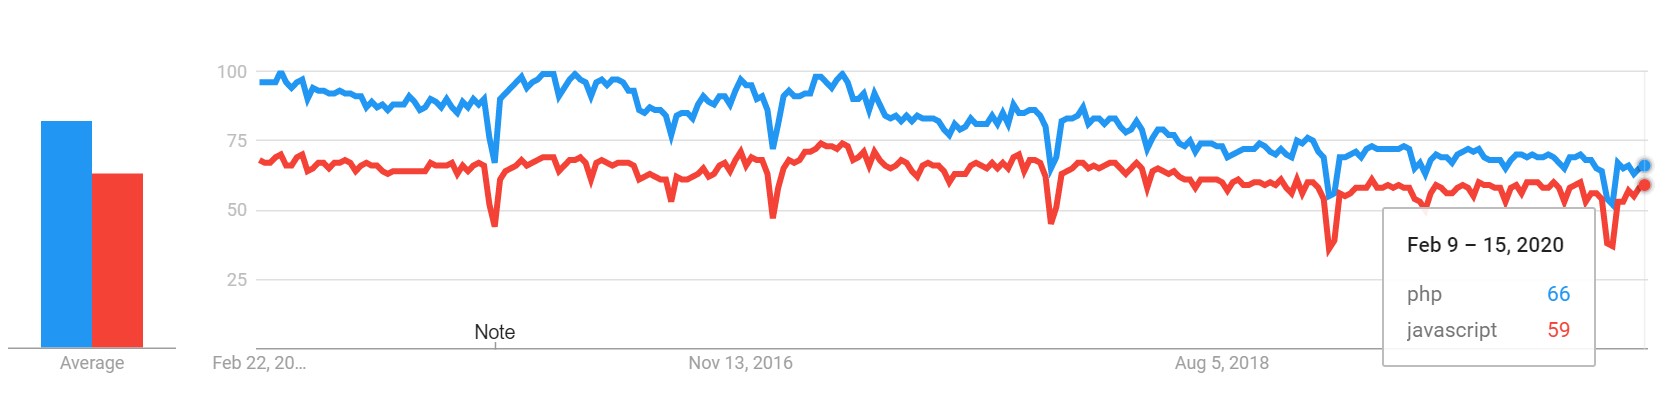 PHP is more popular than JavaScript